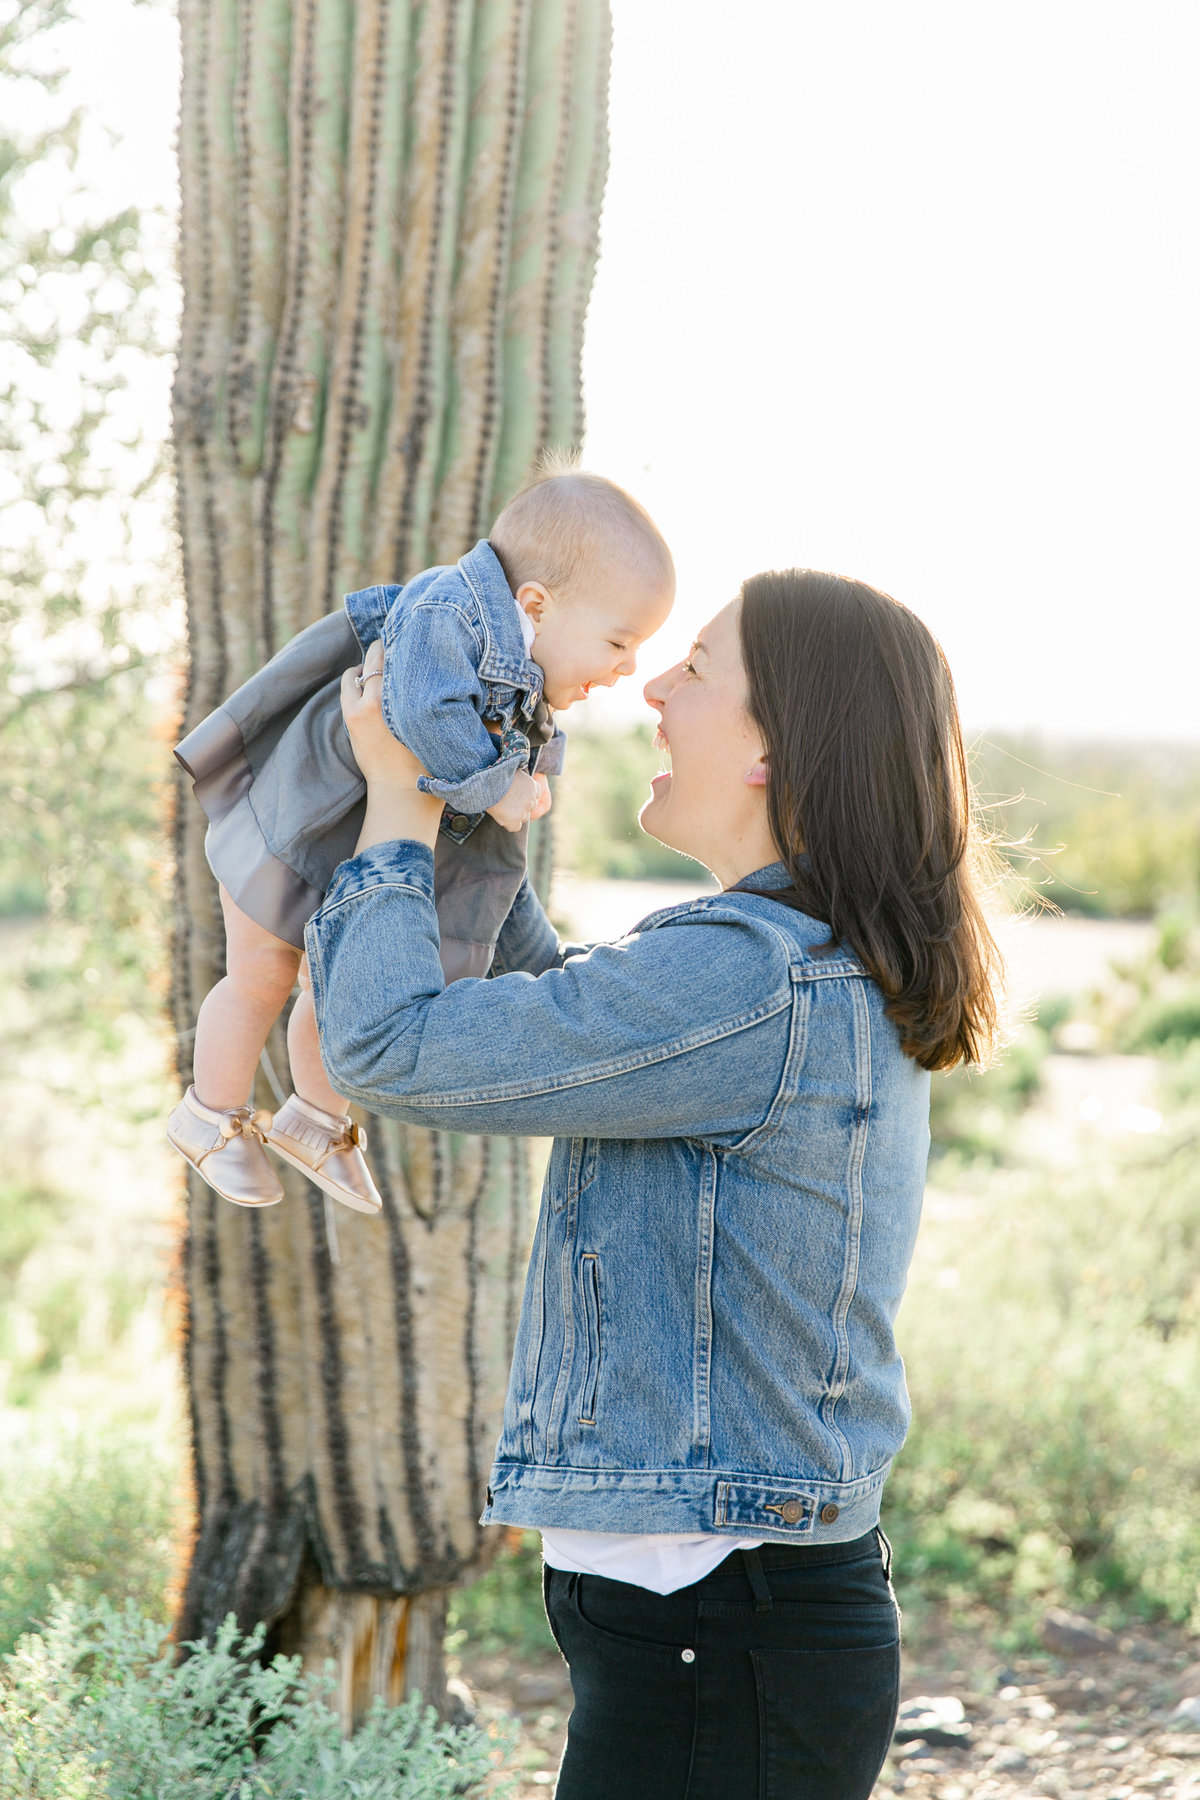 Karlie Colleen Photography - Scottsdale family photography - Victoria & family-37